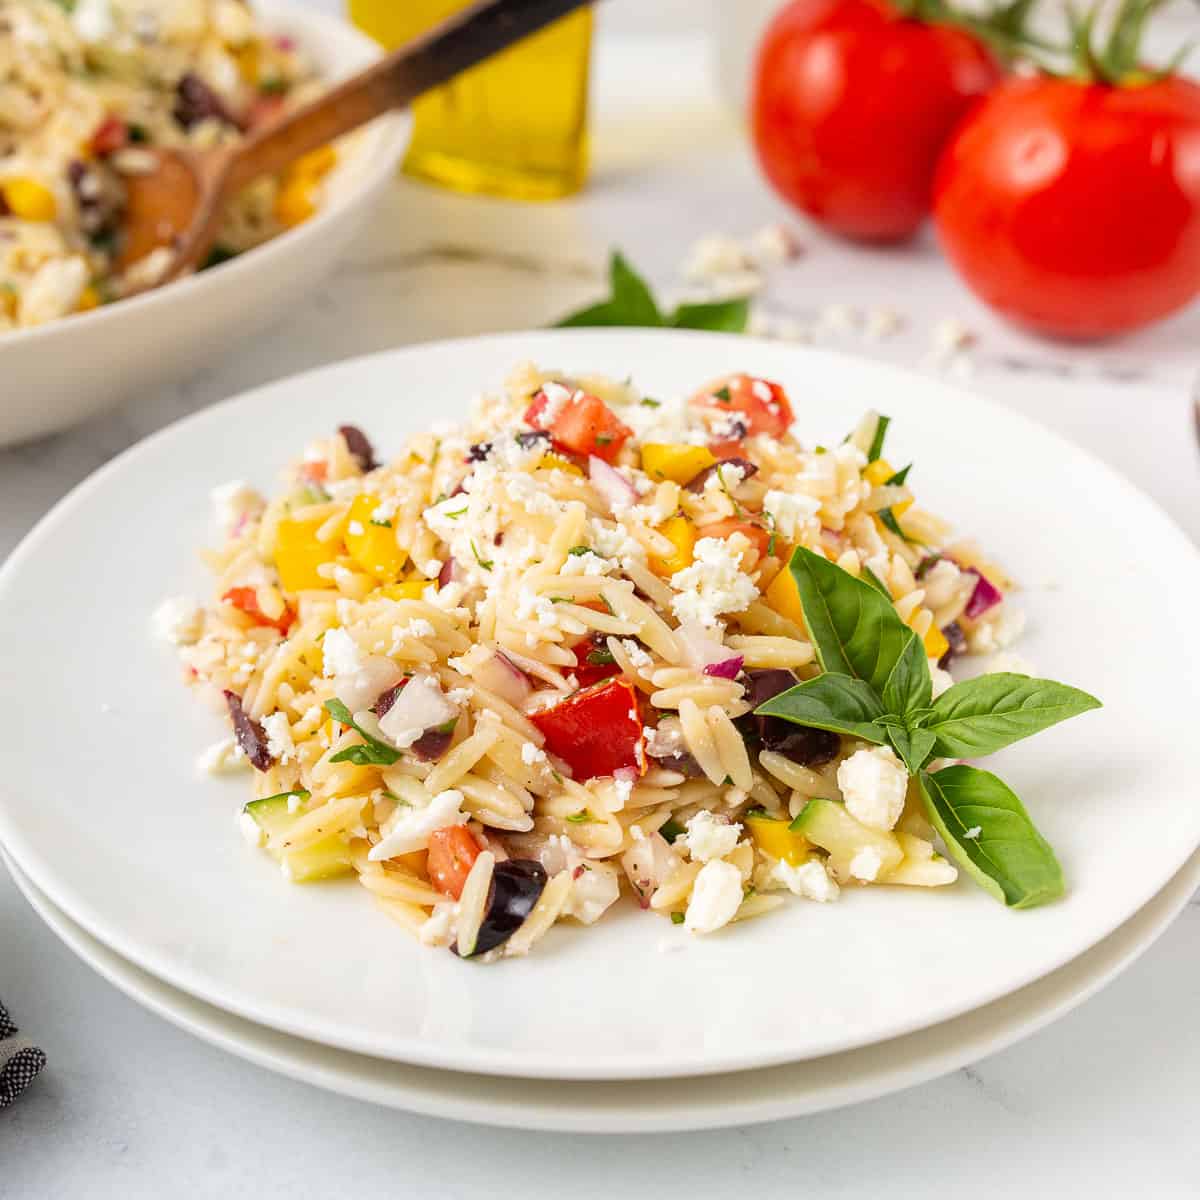 Orzo feta salad with vegetables.